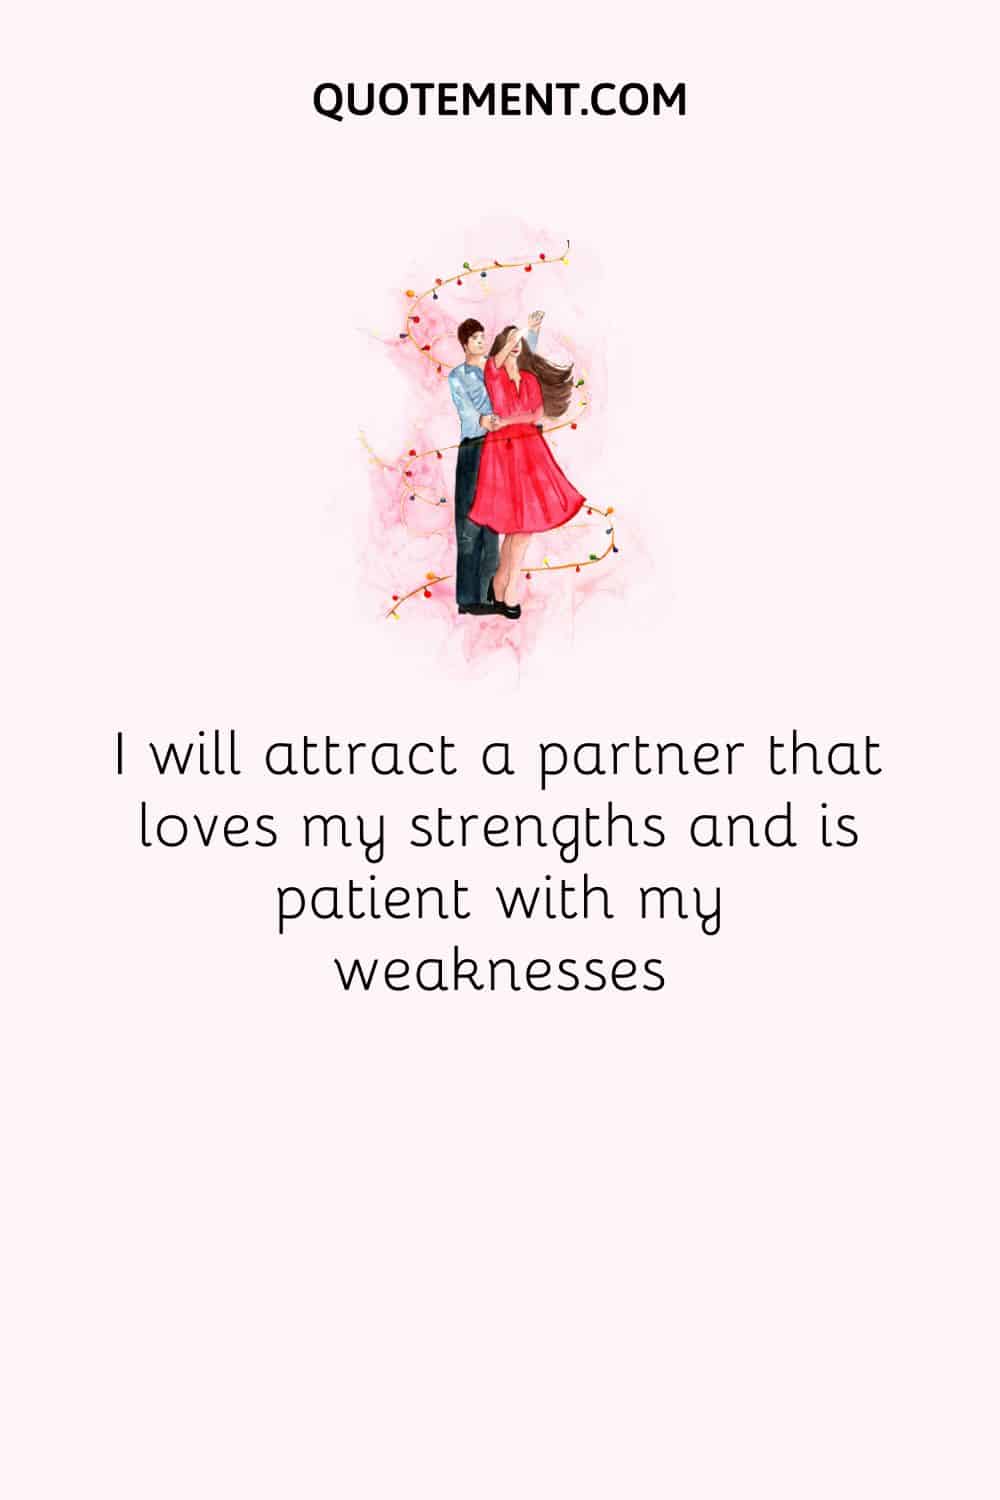 I will attract a partner that loves my strengths and is patient with my weaknesses